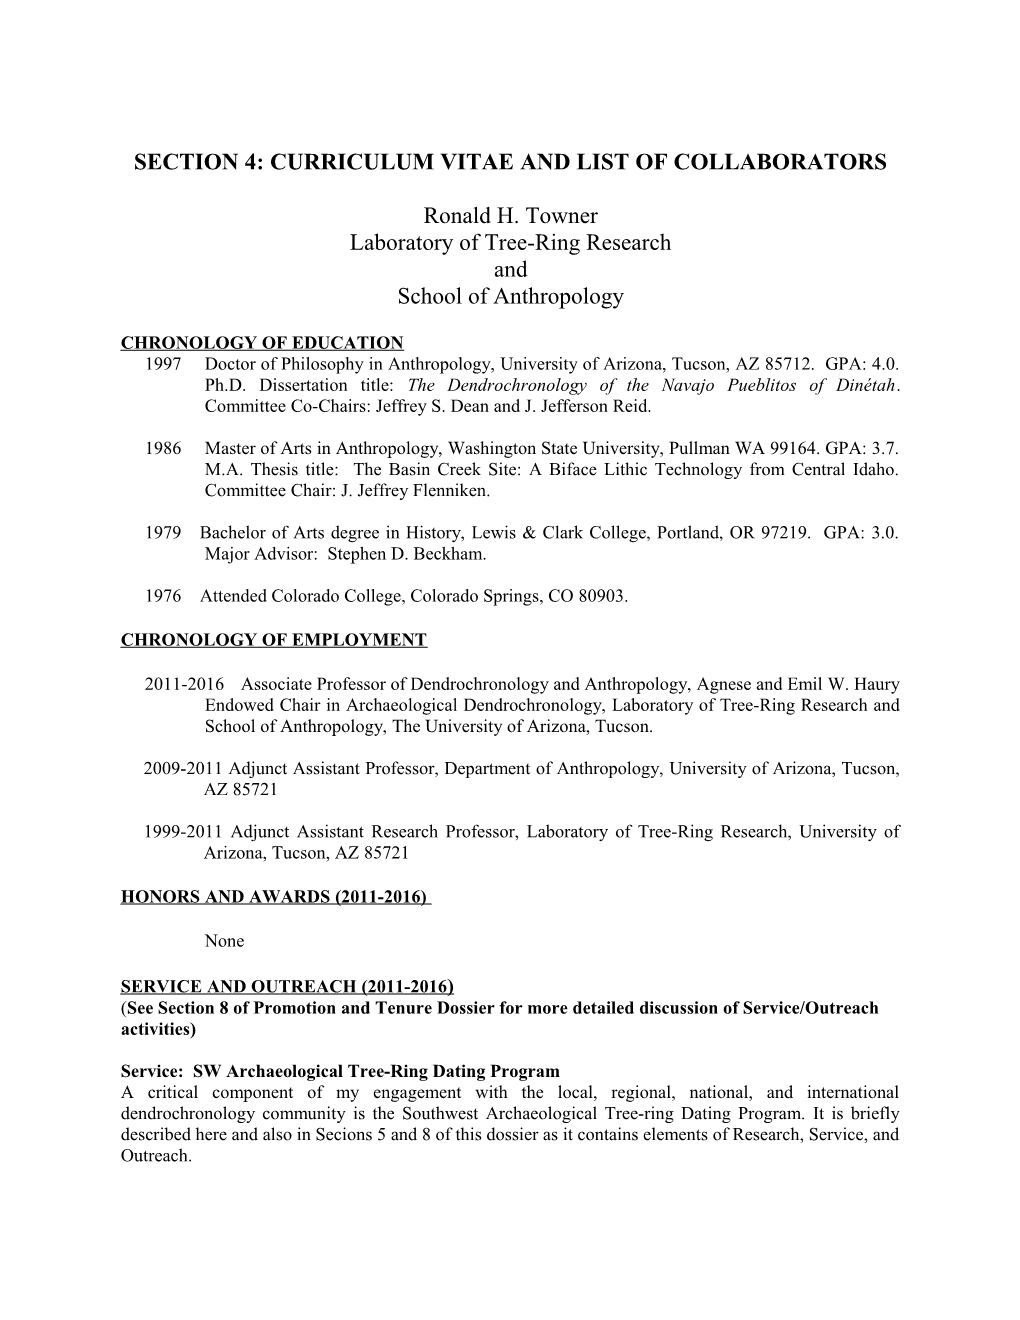 Section 4: Curriculum Vitae and List of Collaborators